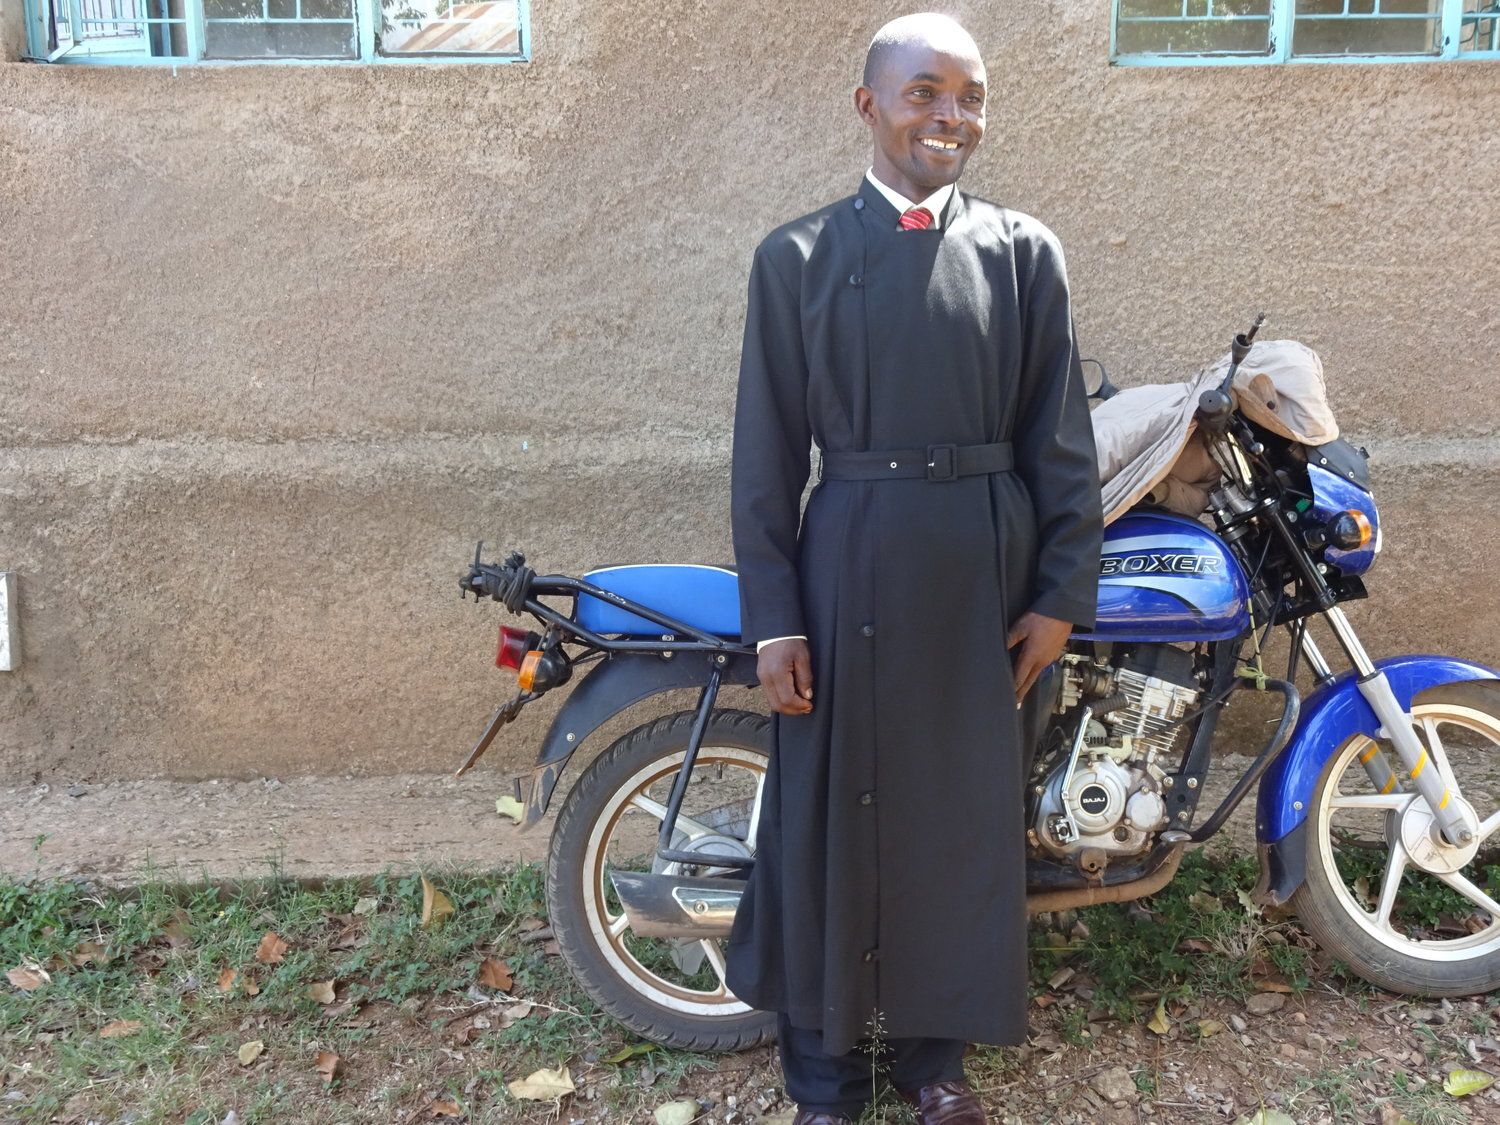 Youth Minister and Motorcycle